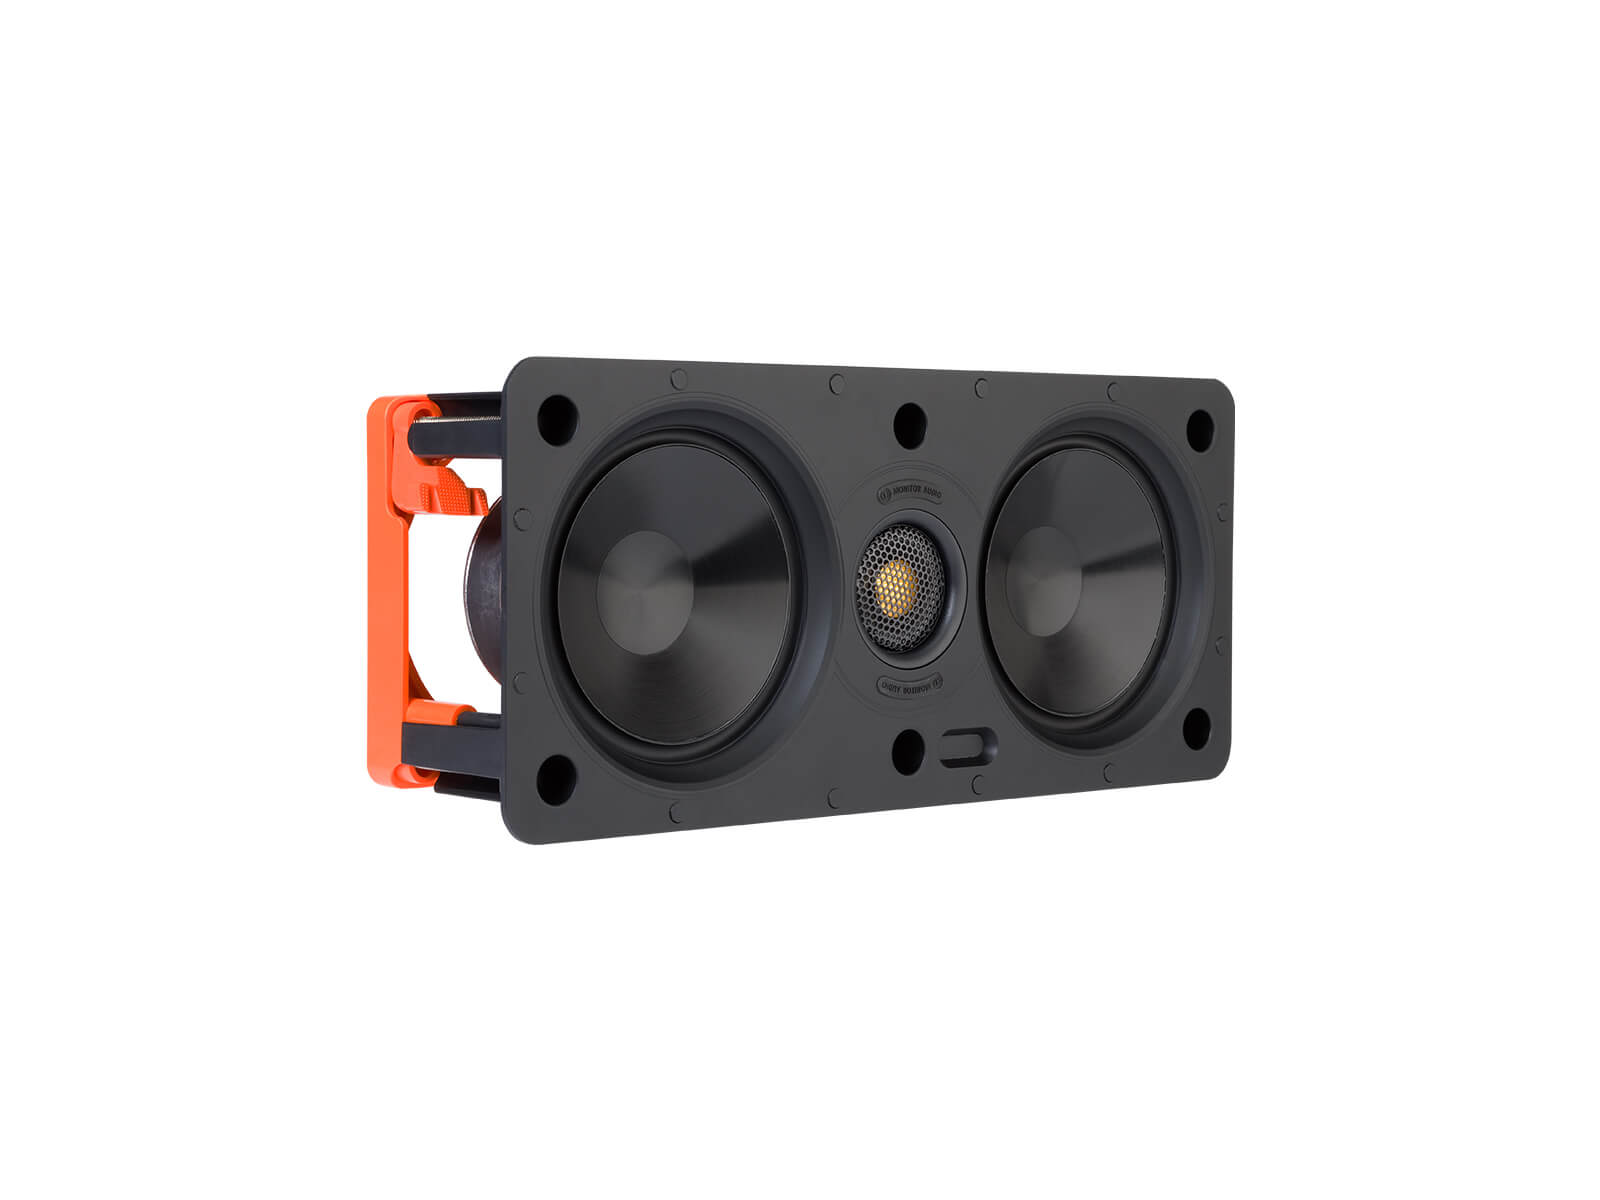 Core W150-LCR, front ISO, grille-less in-wall speakers.